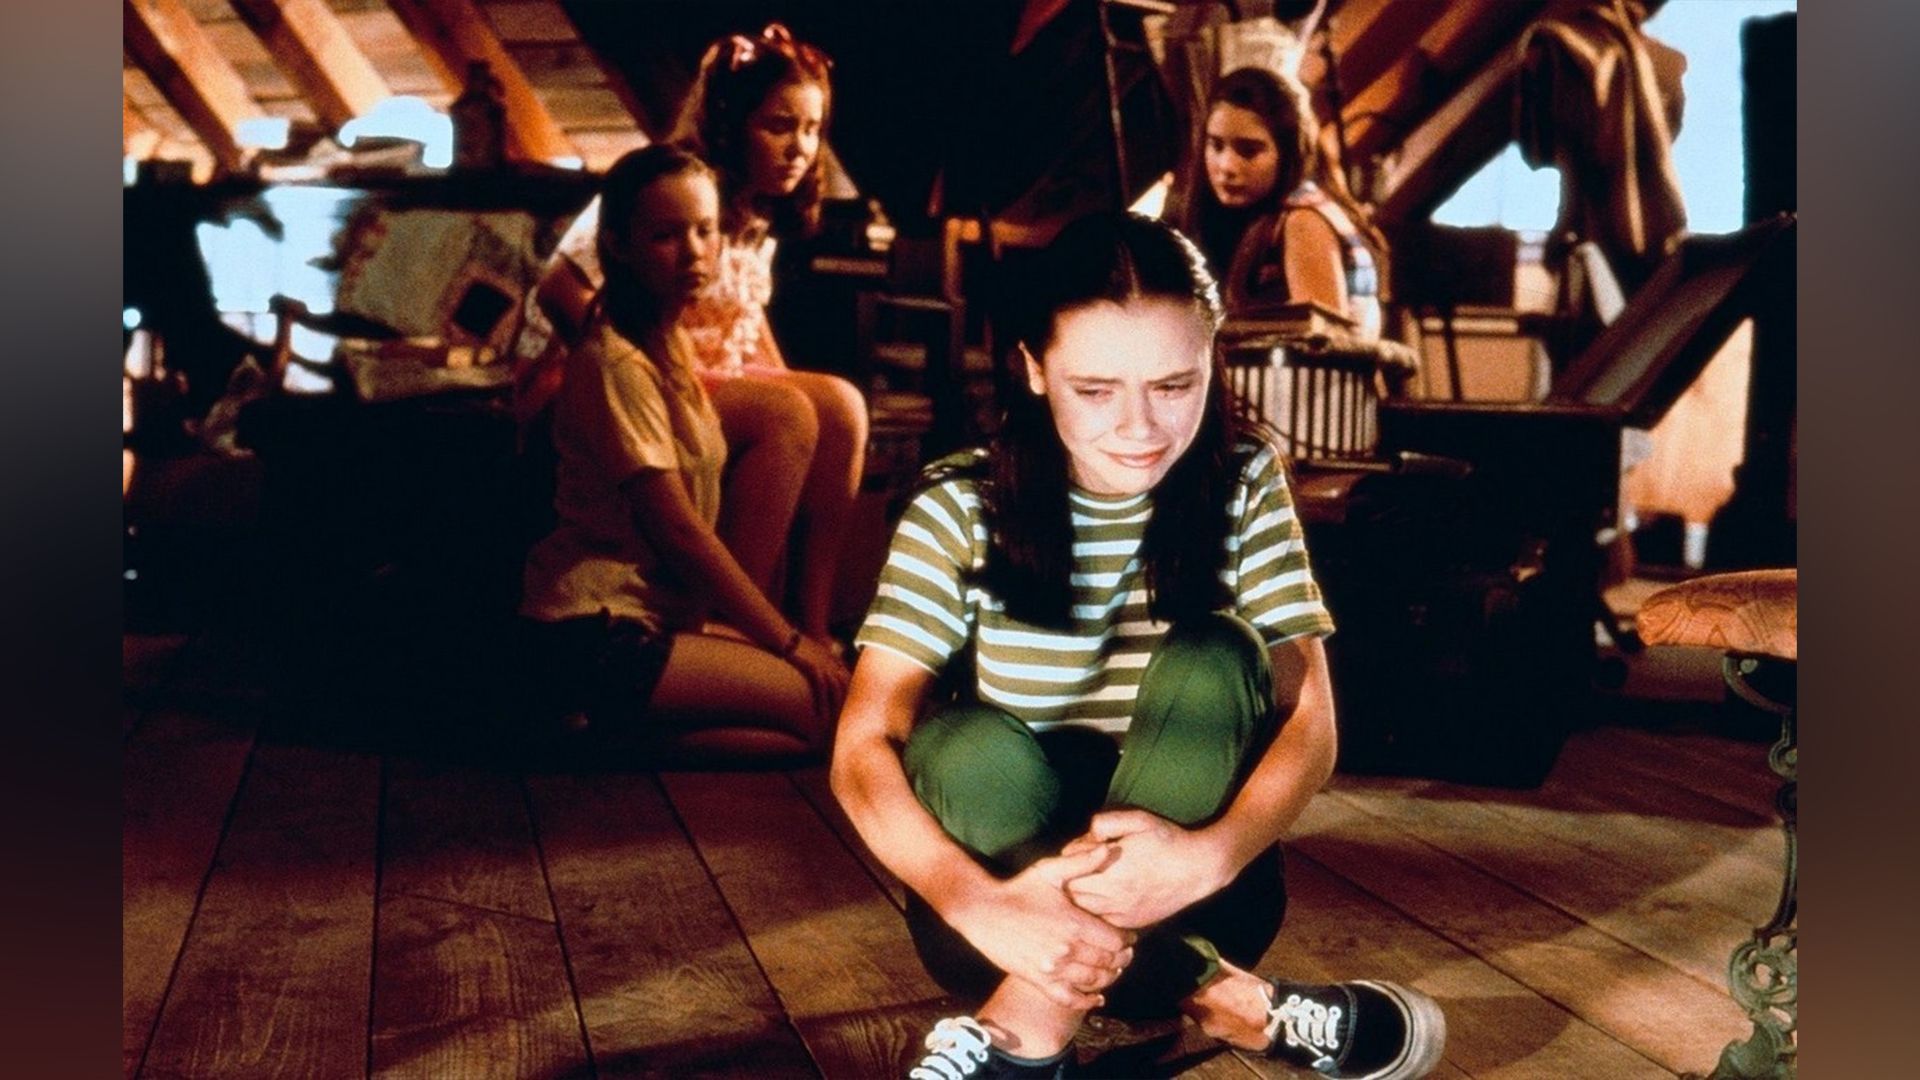 Christina Ricci in the movie 'Now and Then'